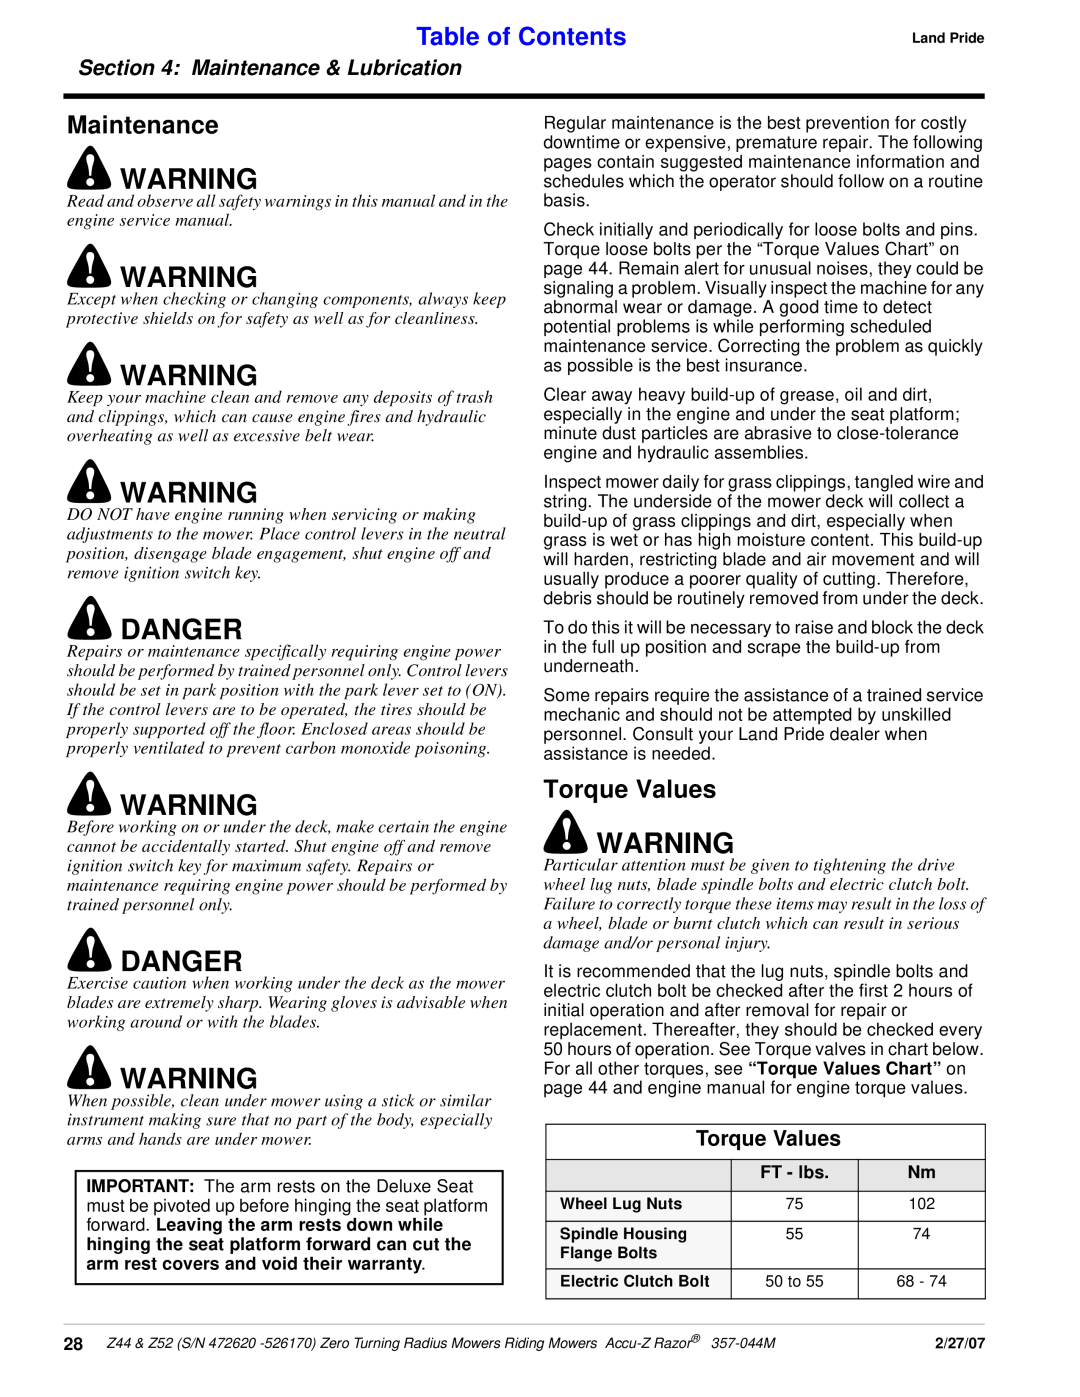 Land Pride 357-044M manual Danger, Table of Contents, Torque Values, Maintenance & Lubrication, FT - lbs 